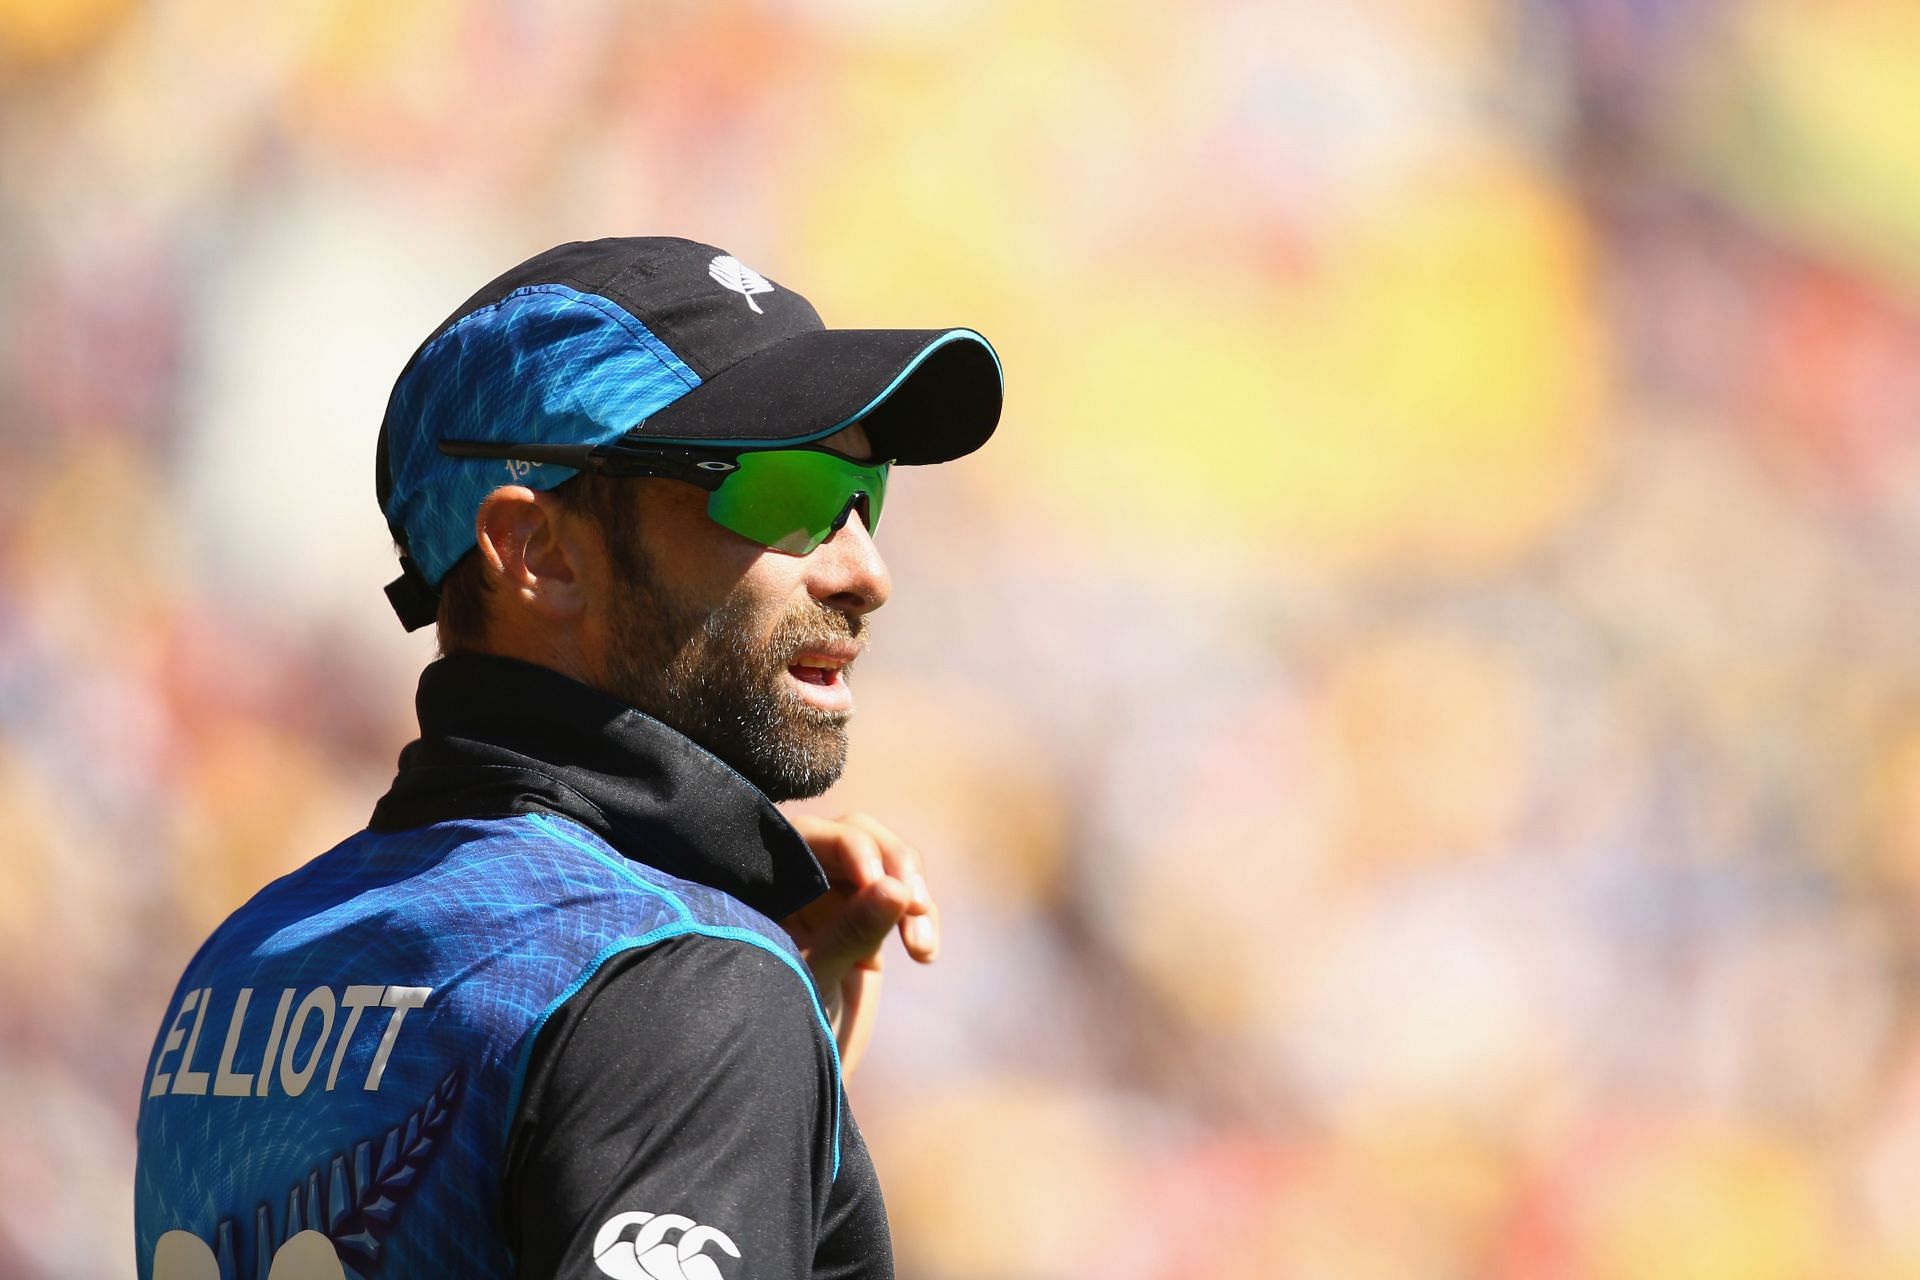 Grant Elliott is considered one of the best all-rounders for New Zealand (Picture: Getty)